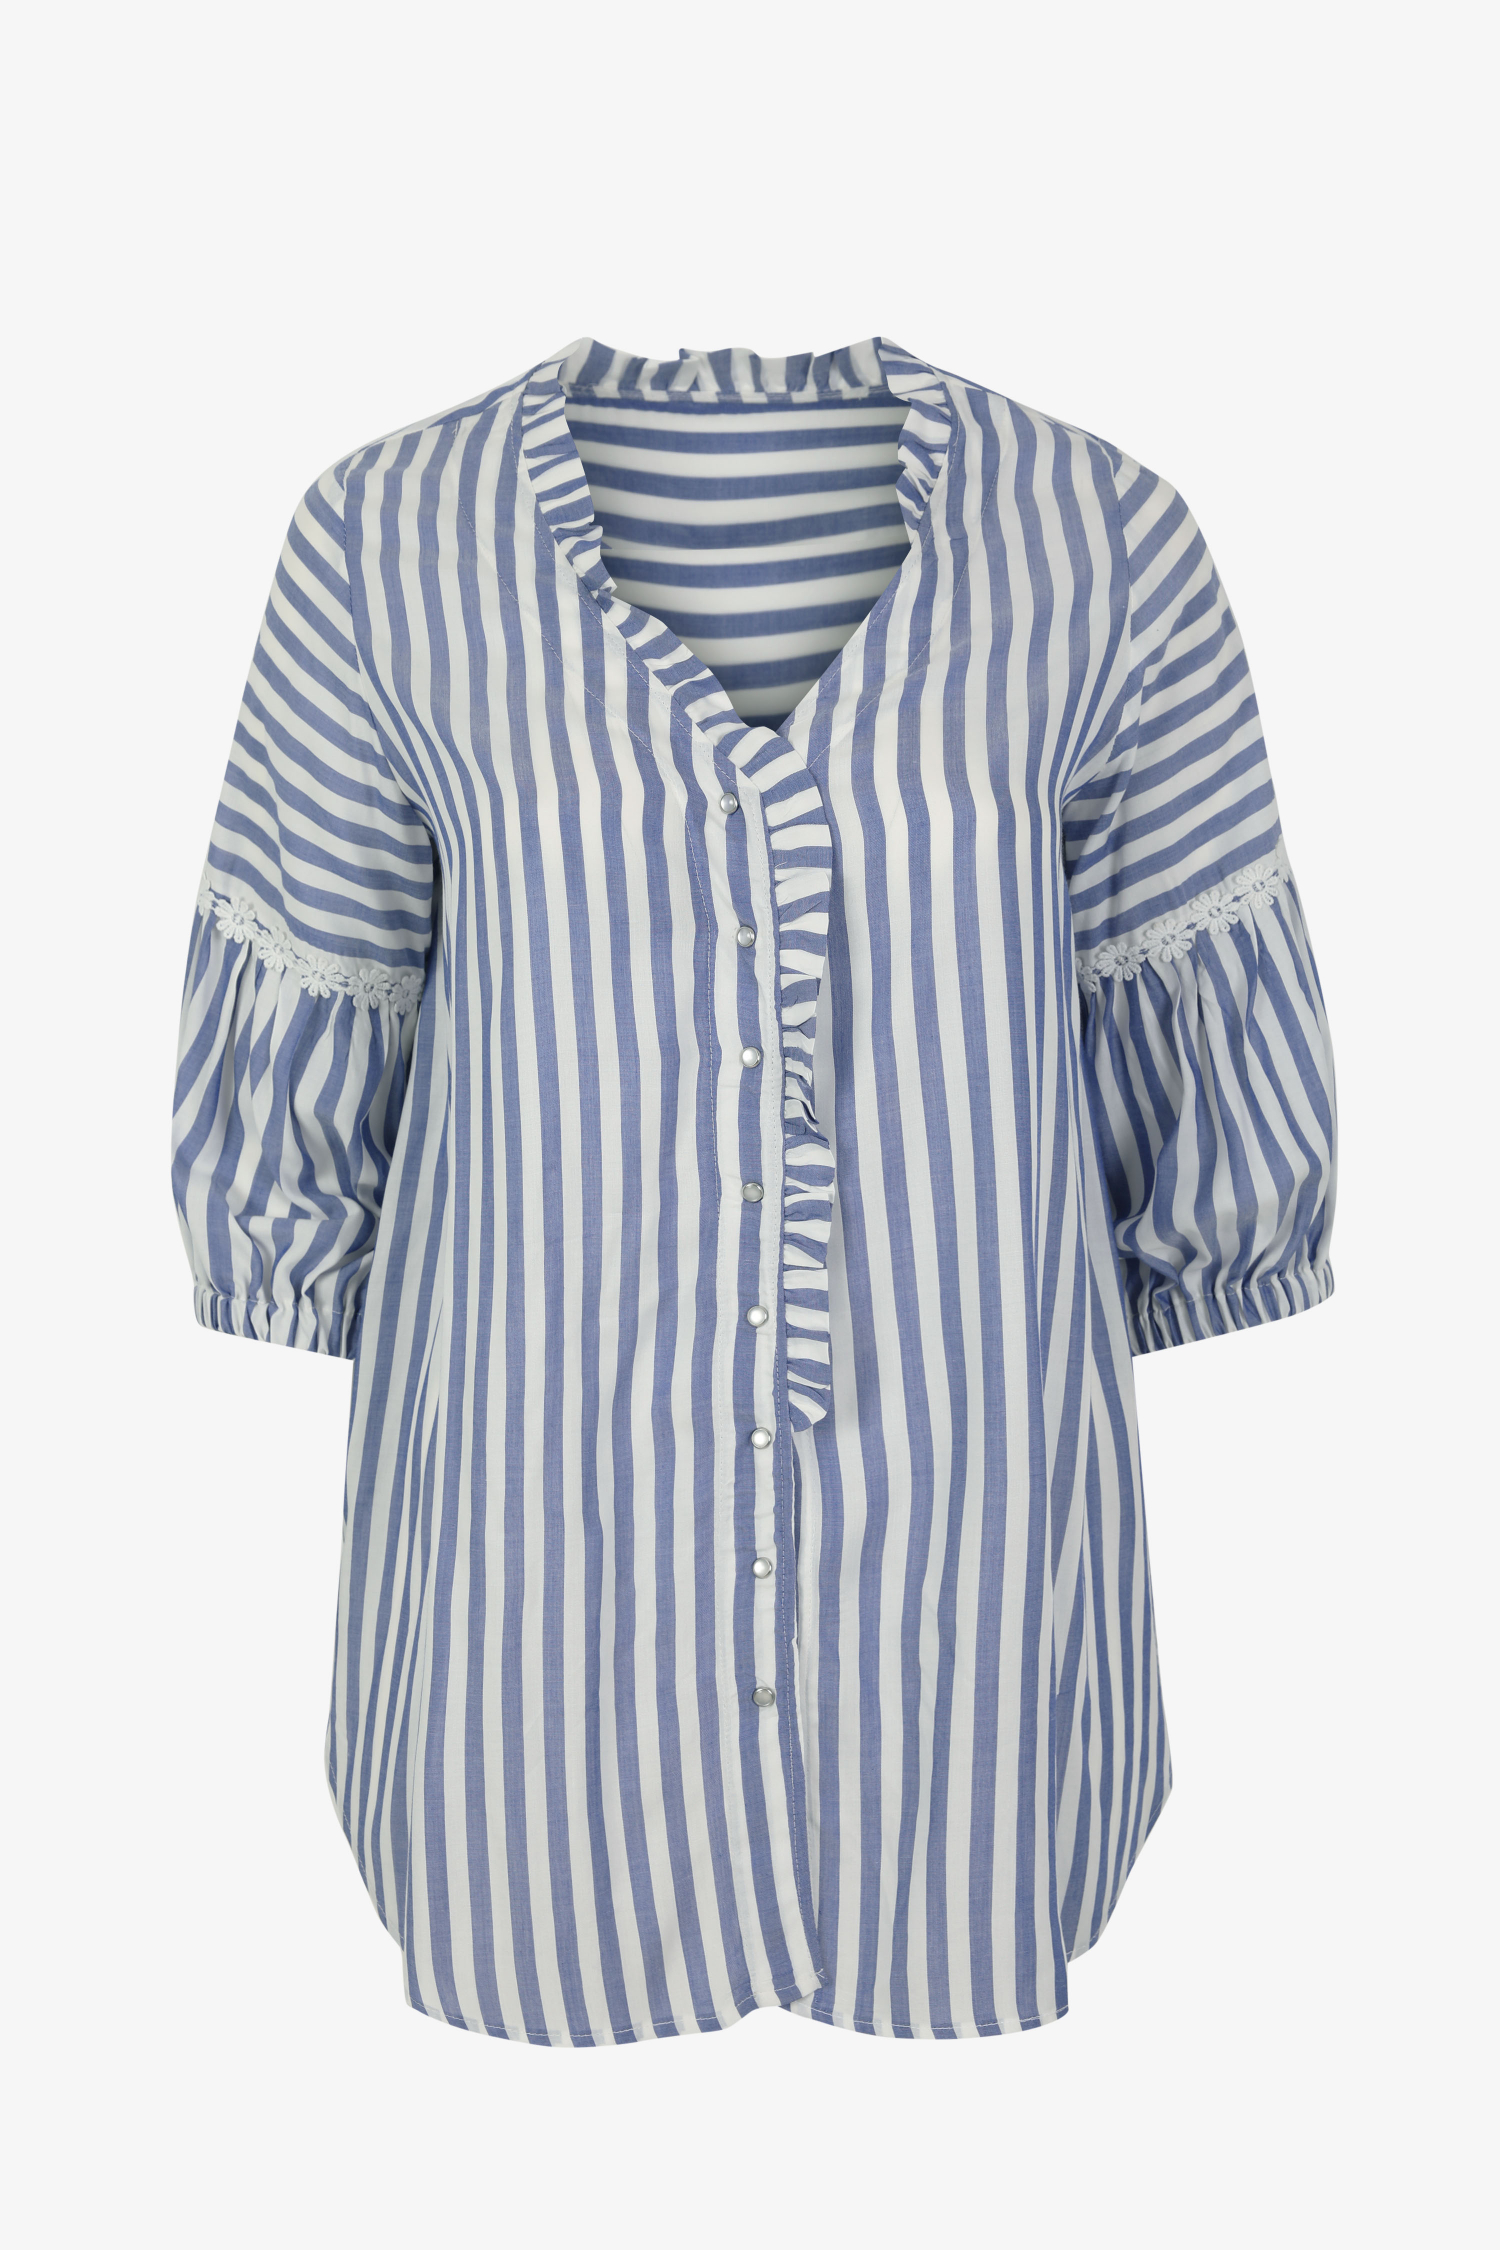 striped shirt with pearly pressure